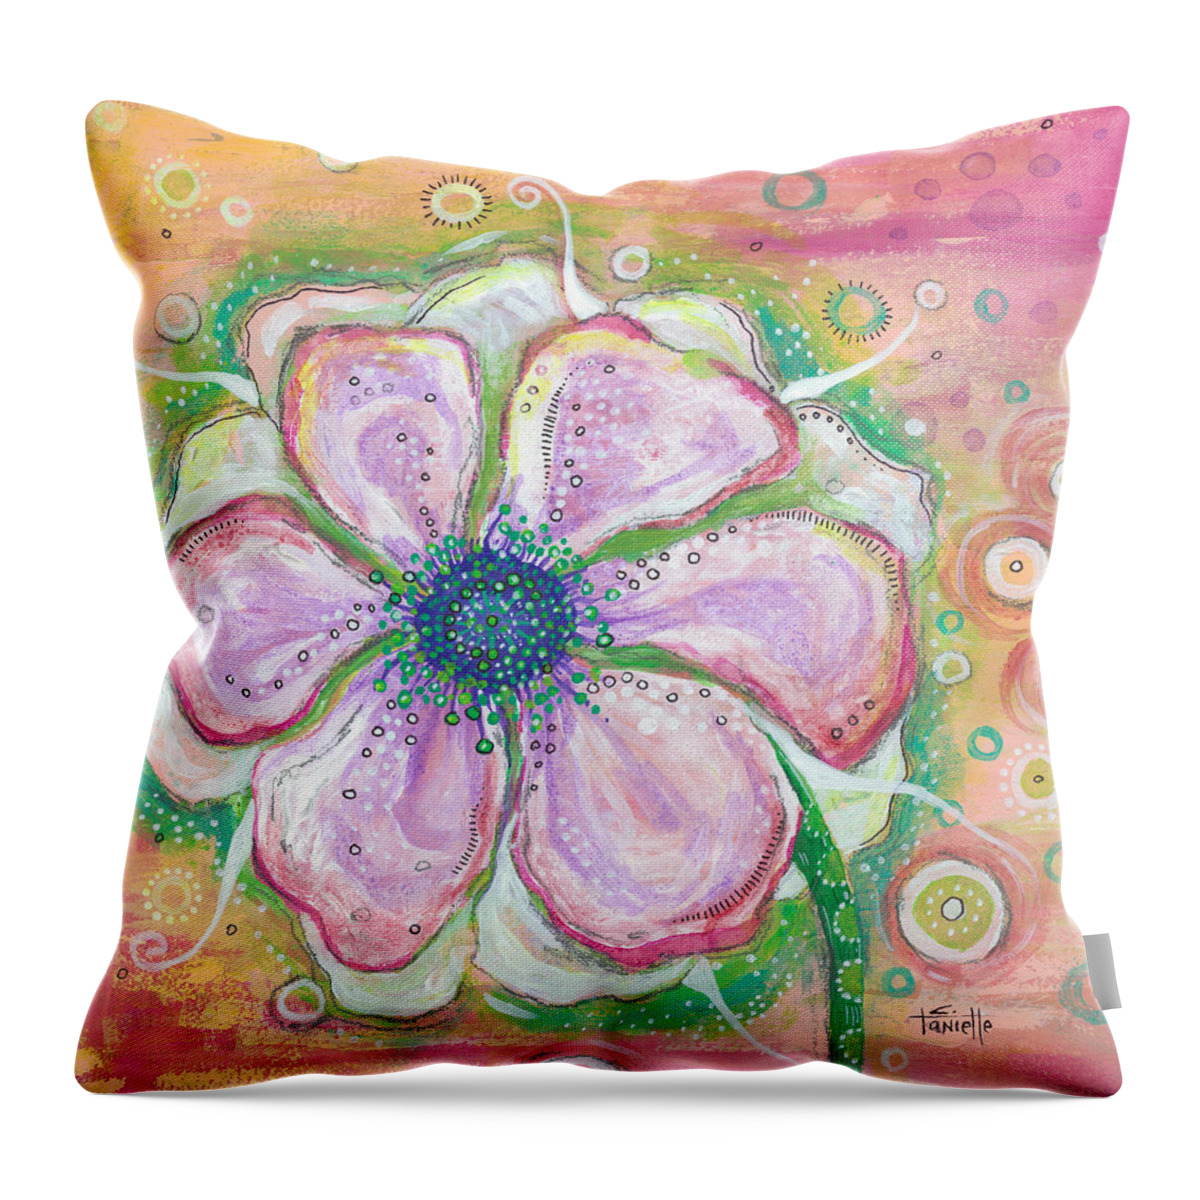 Flower Painting Throw Pillow featuring the painting Be Still My Heart by Tanielle Childers